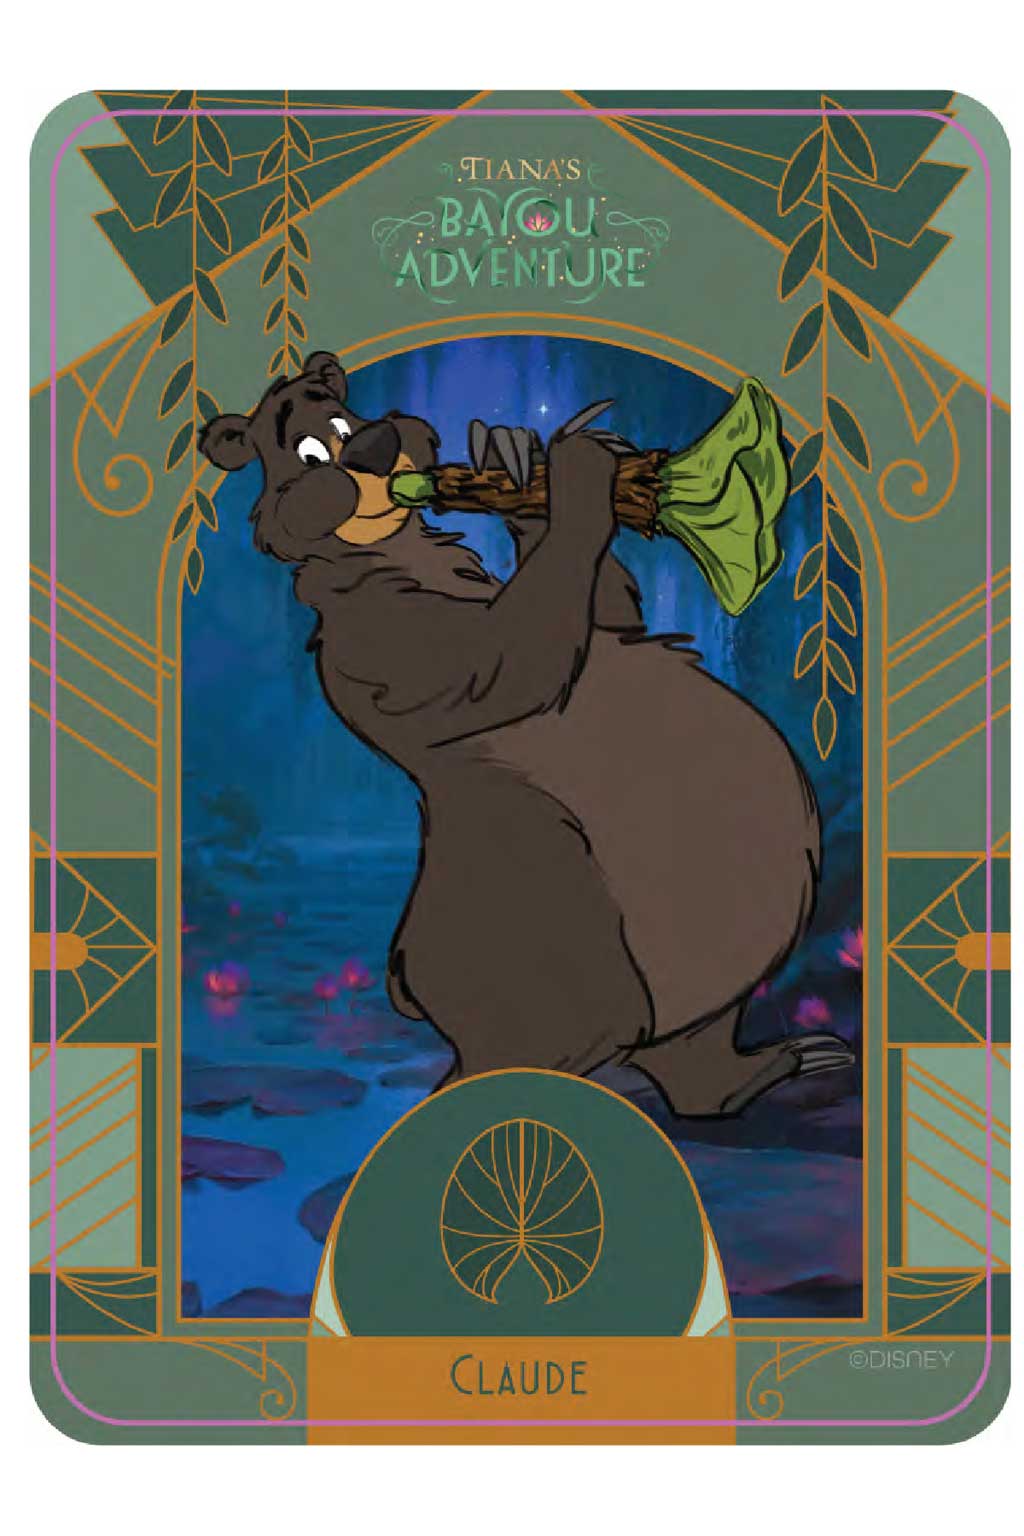 Claude the Louisiana Black Bear – Claude is a salt of the earth kind of bear (or, as they say in the bayou, “salt of the mound”) who plays his horn along with the other members of his family. He’s a tinkerer who loves to create with things found in the forest, and is frequently funny without intending to be, especially when it comes to his home-grown creations.